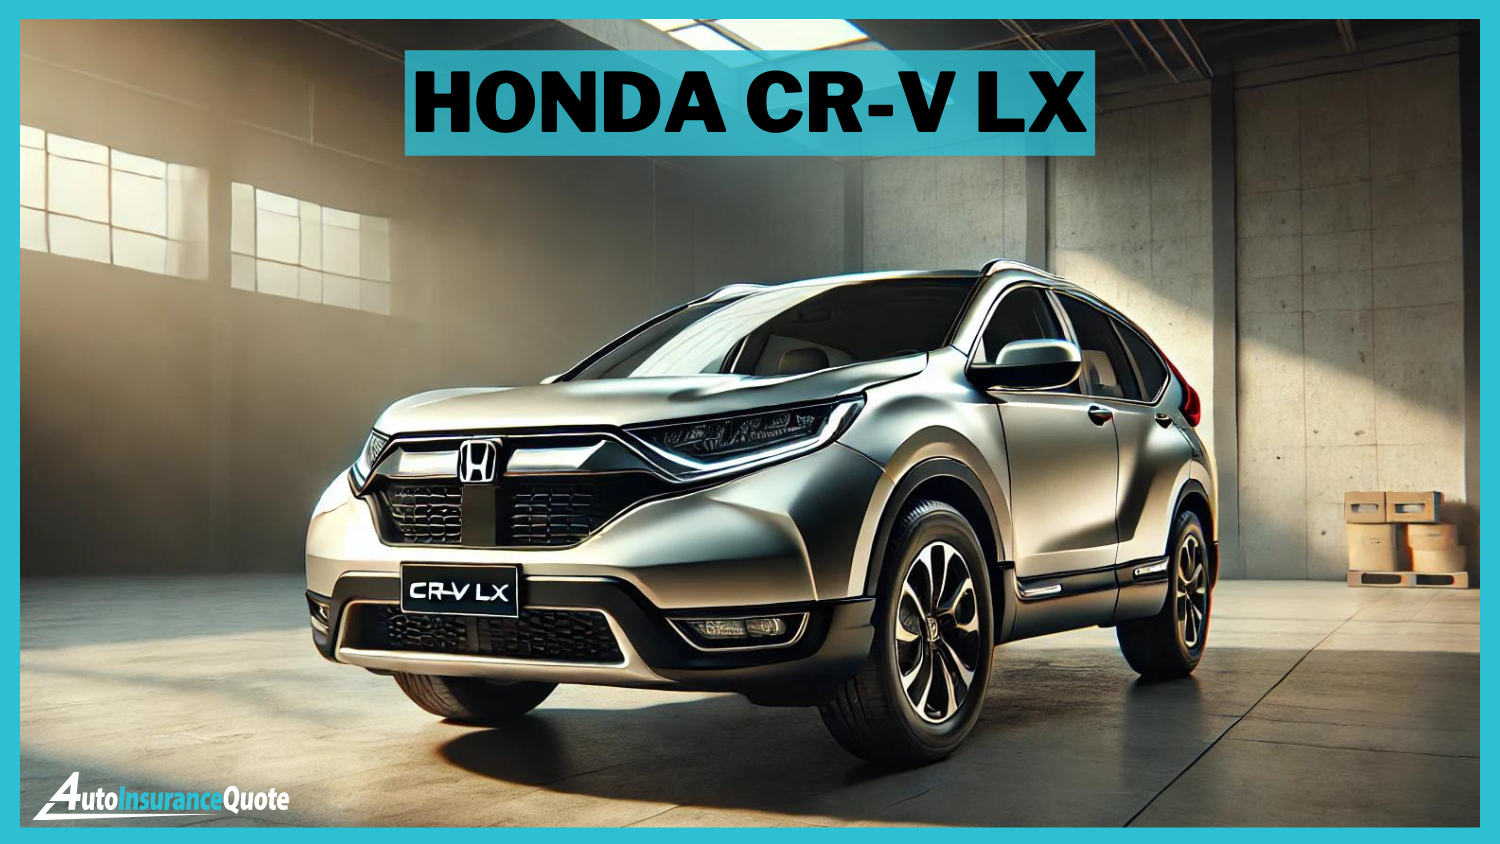 Honda CR-V LX: Cheapest Cars for 17-Year-Olds to Insure